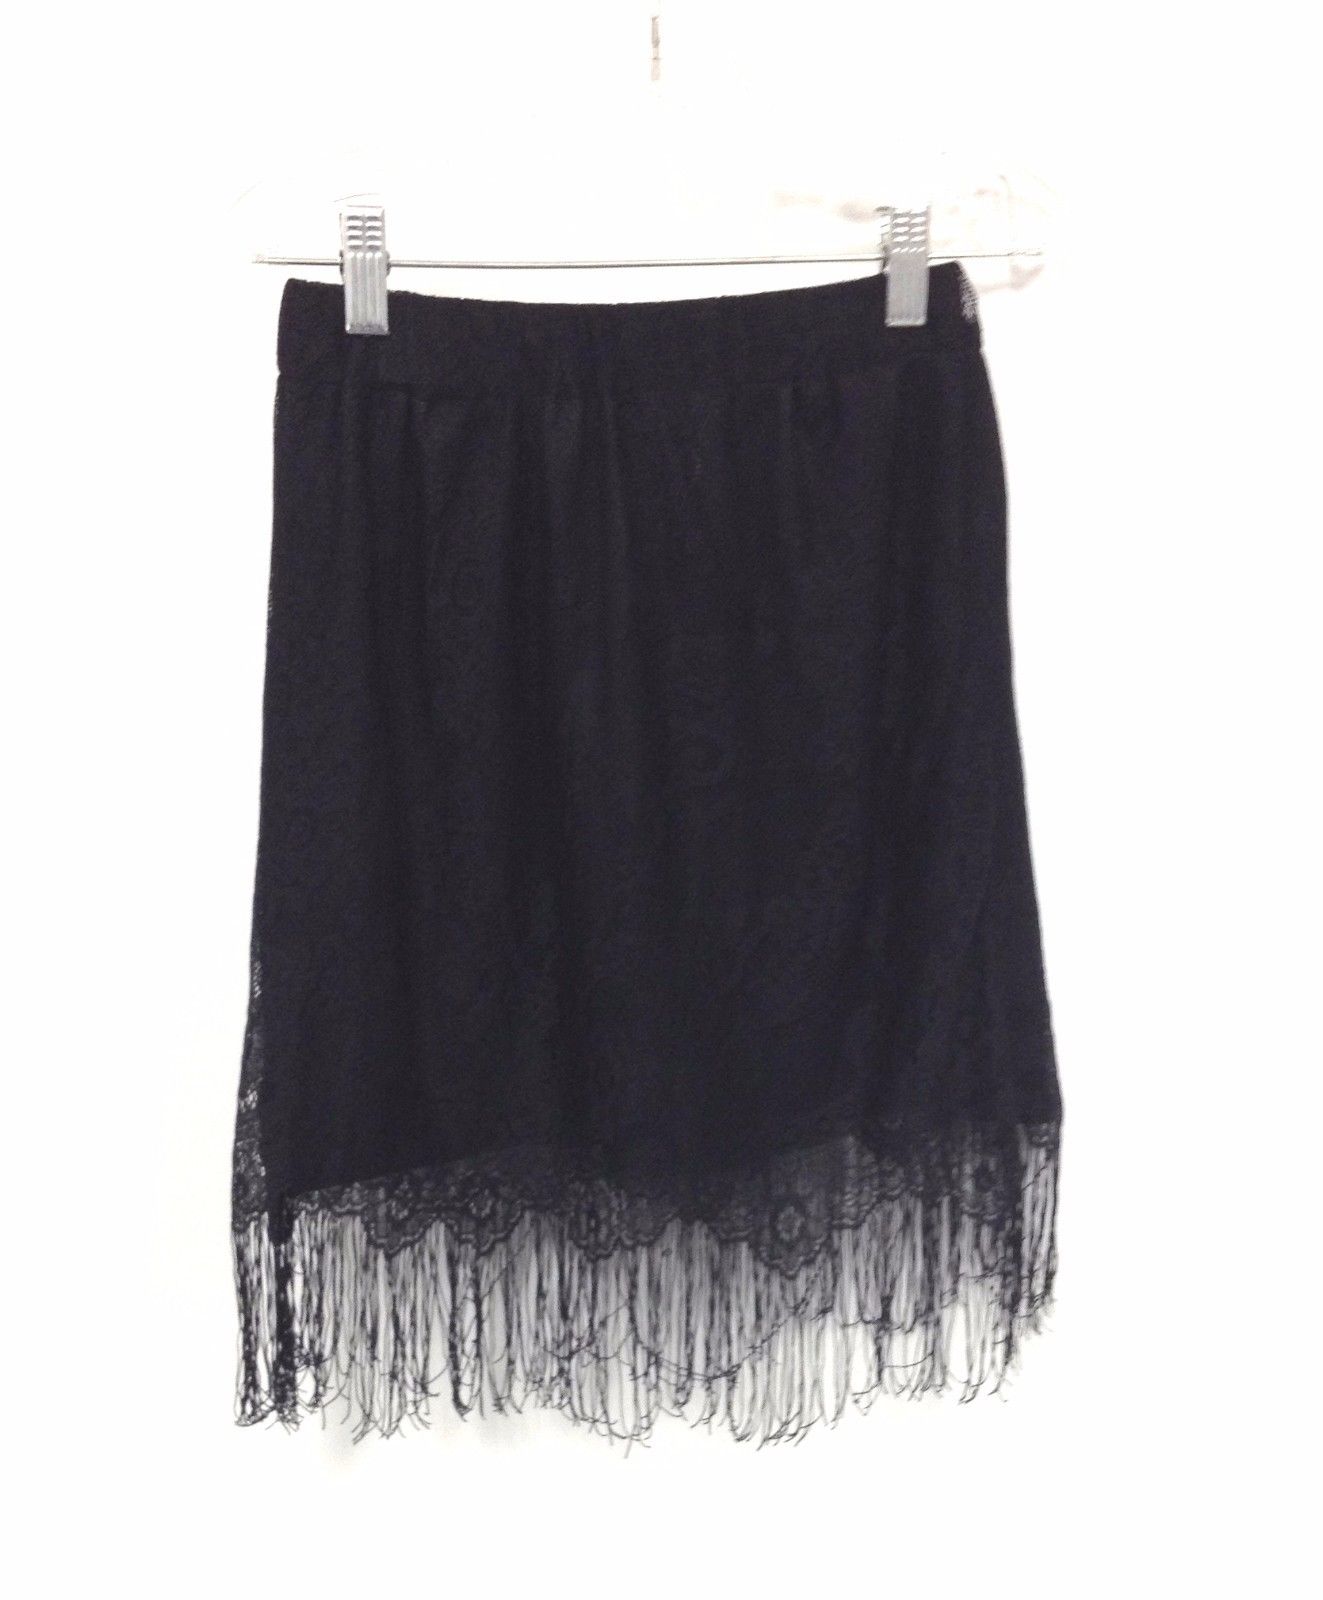 Size M Mags & Pye Sheer Black Lace Skirt